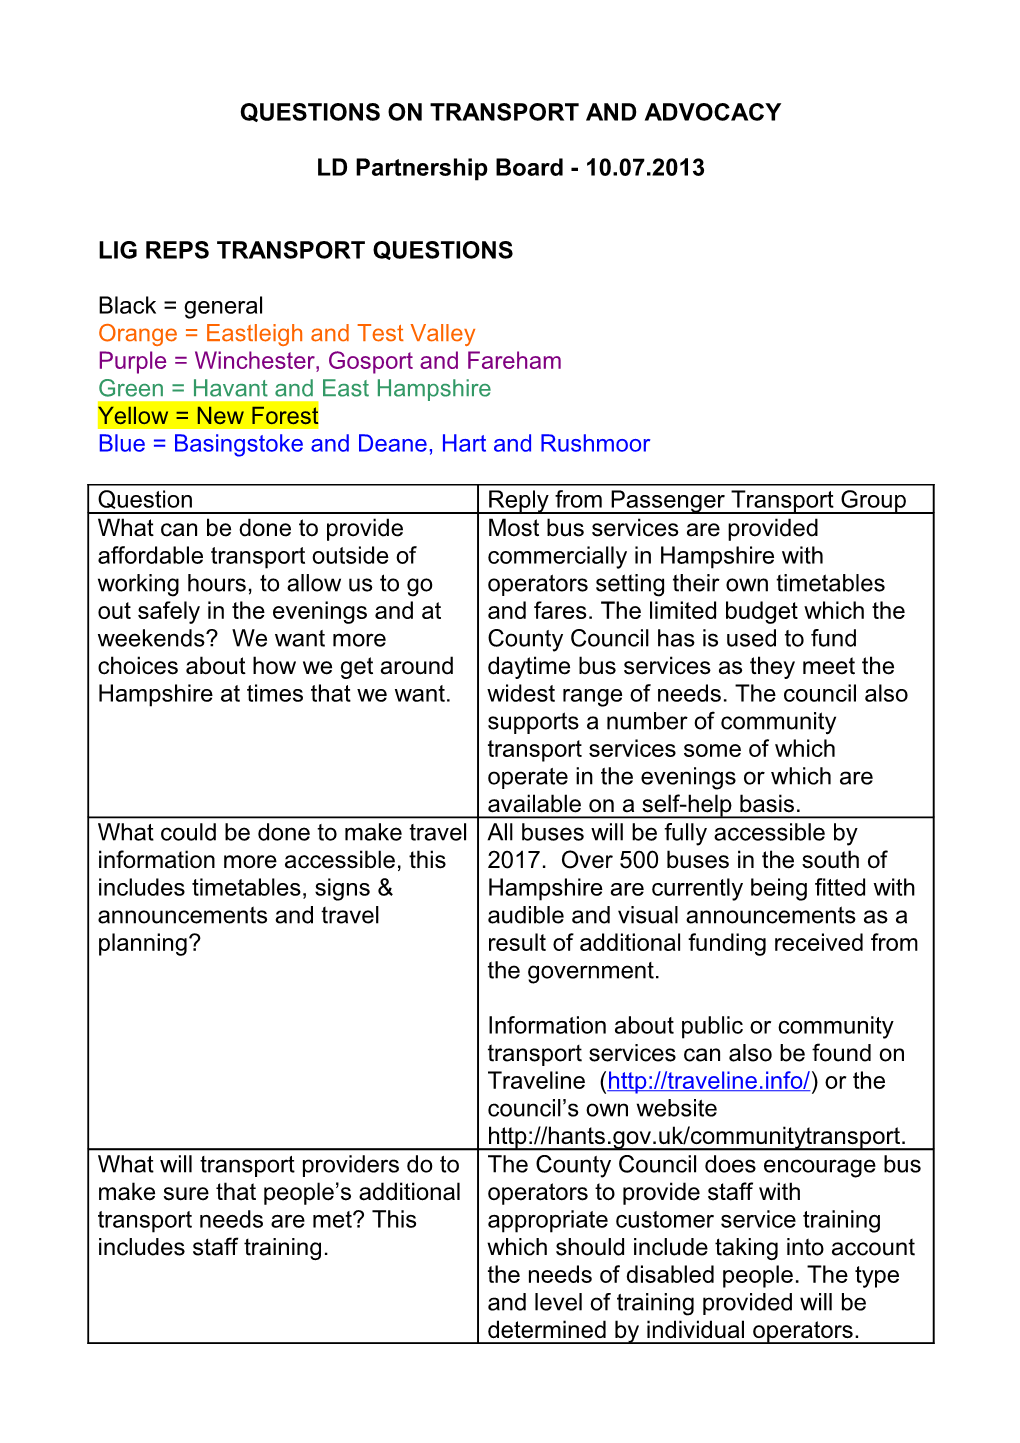 Questions on Transport and Advocacy